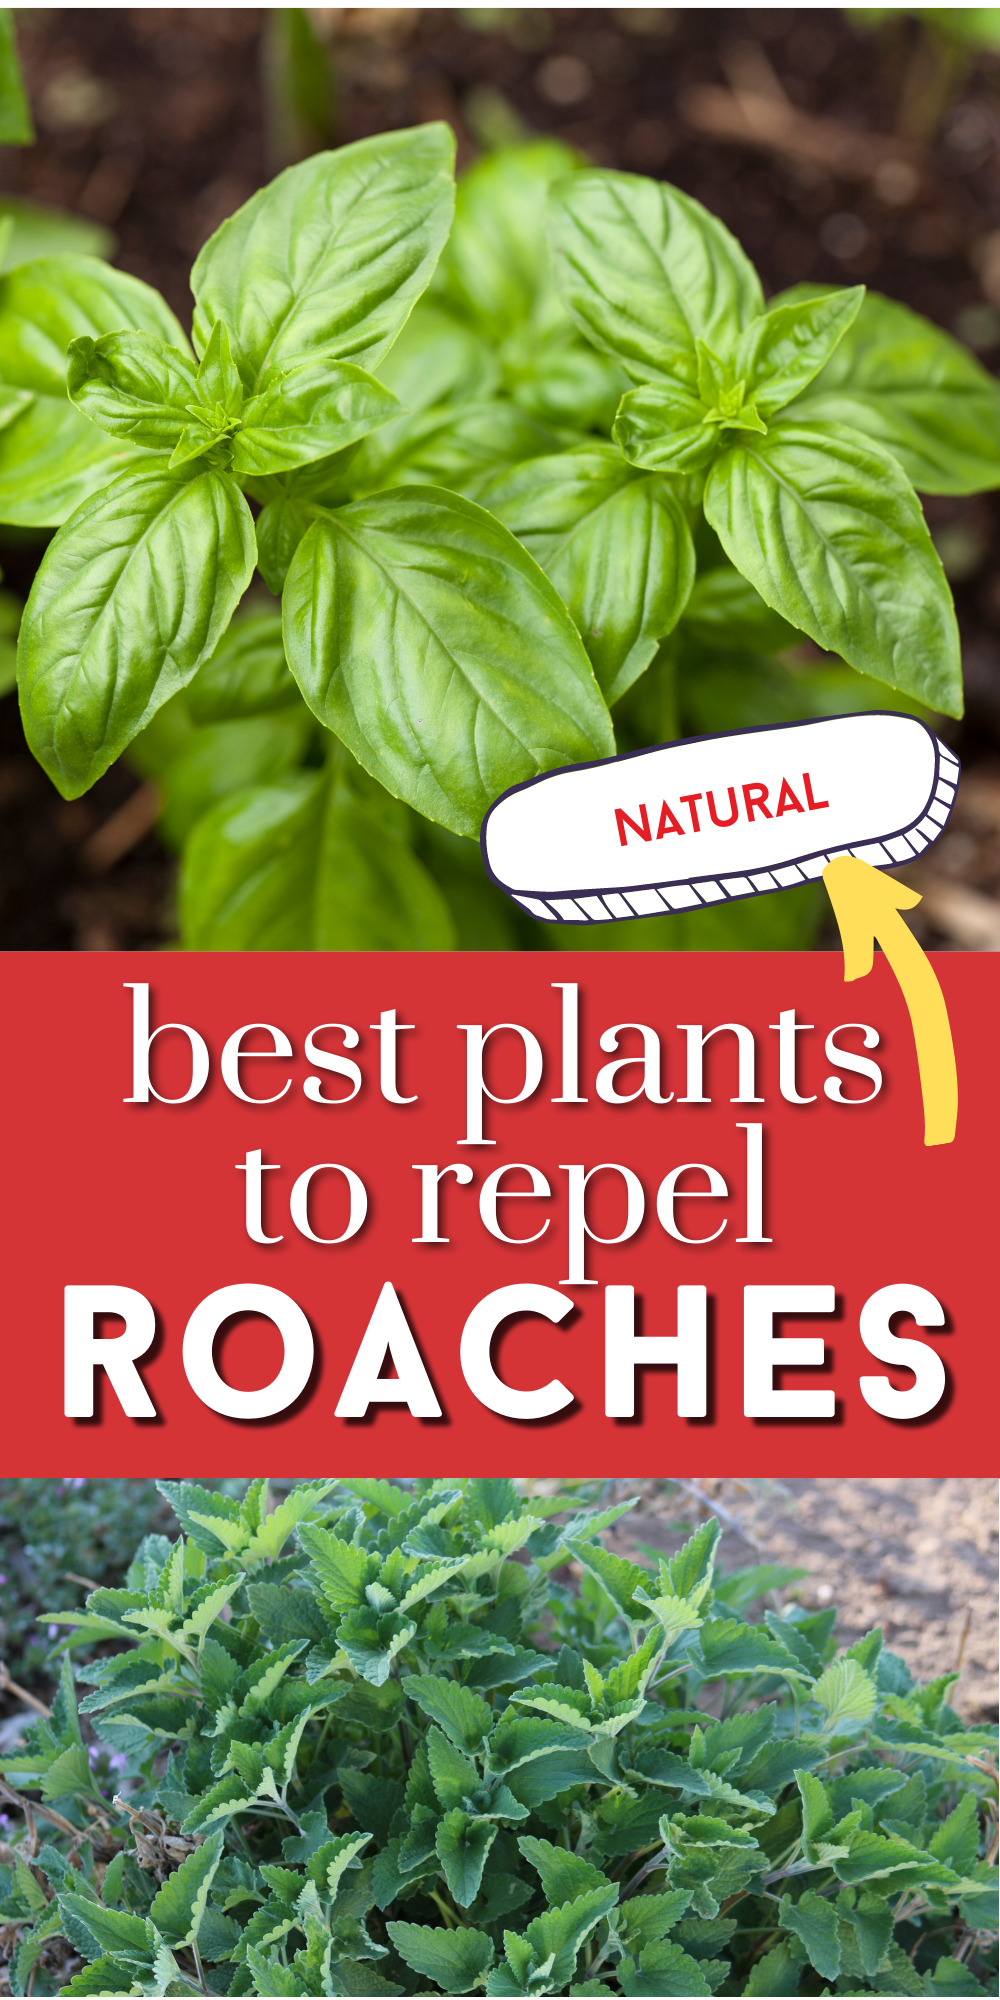 What Plants Keep Roaches Away? 